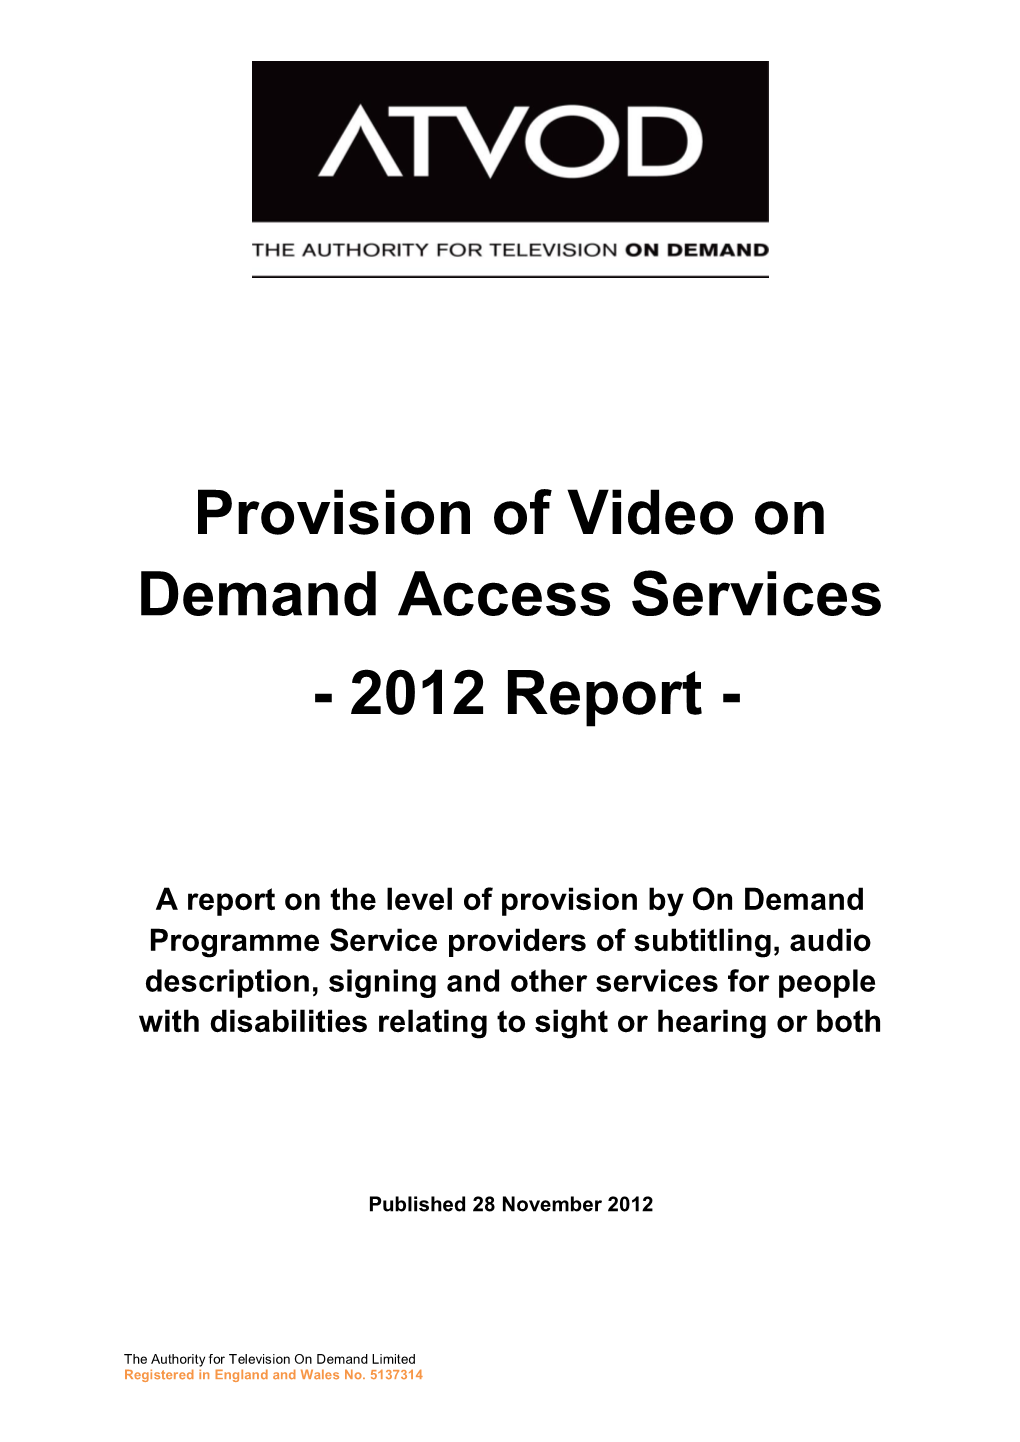 Provision of VOD Access Services: 2012 Report